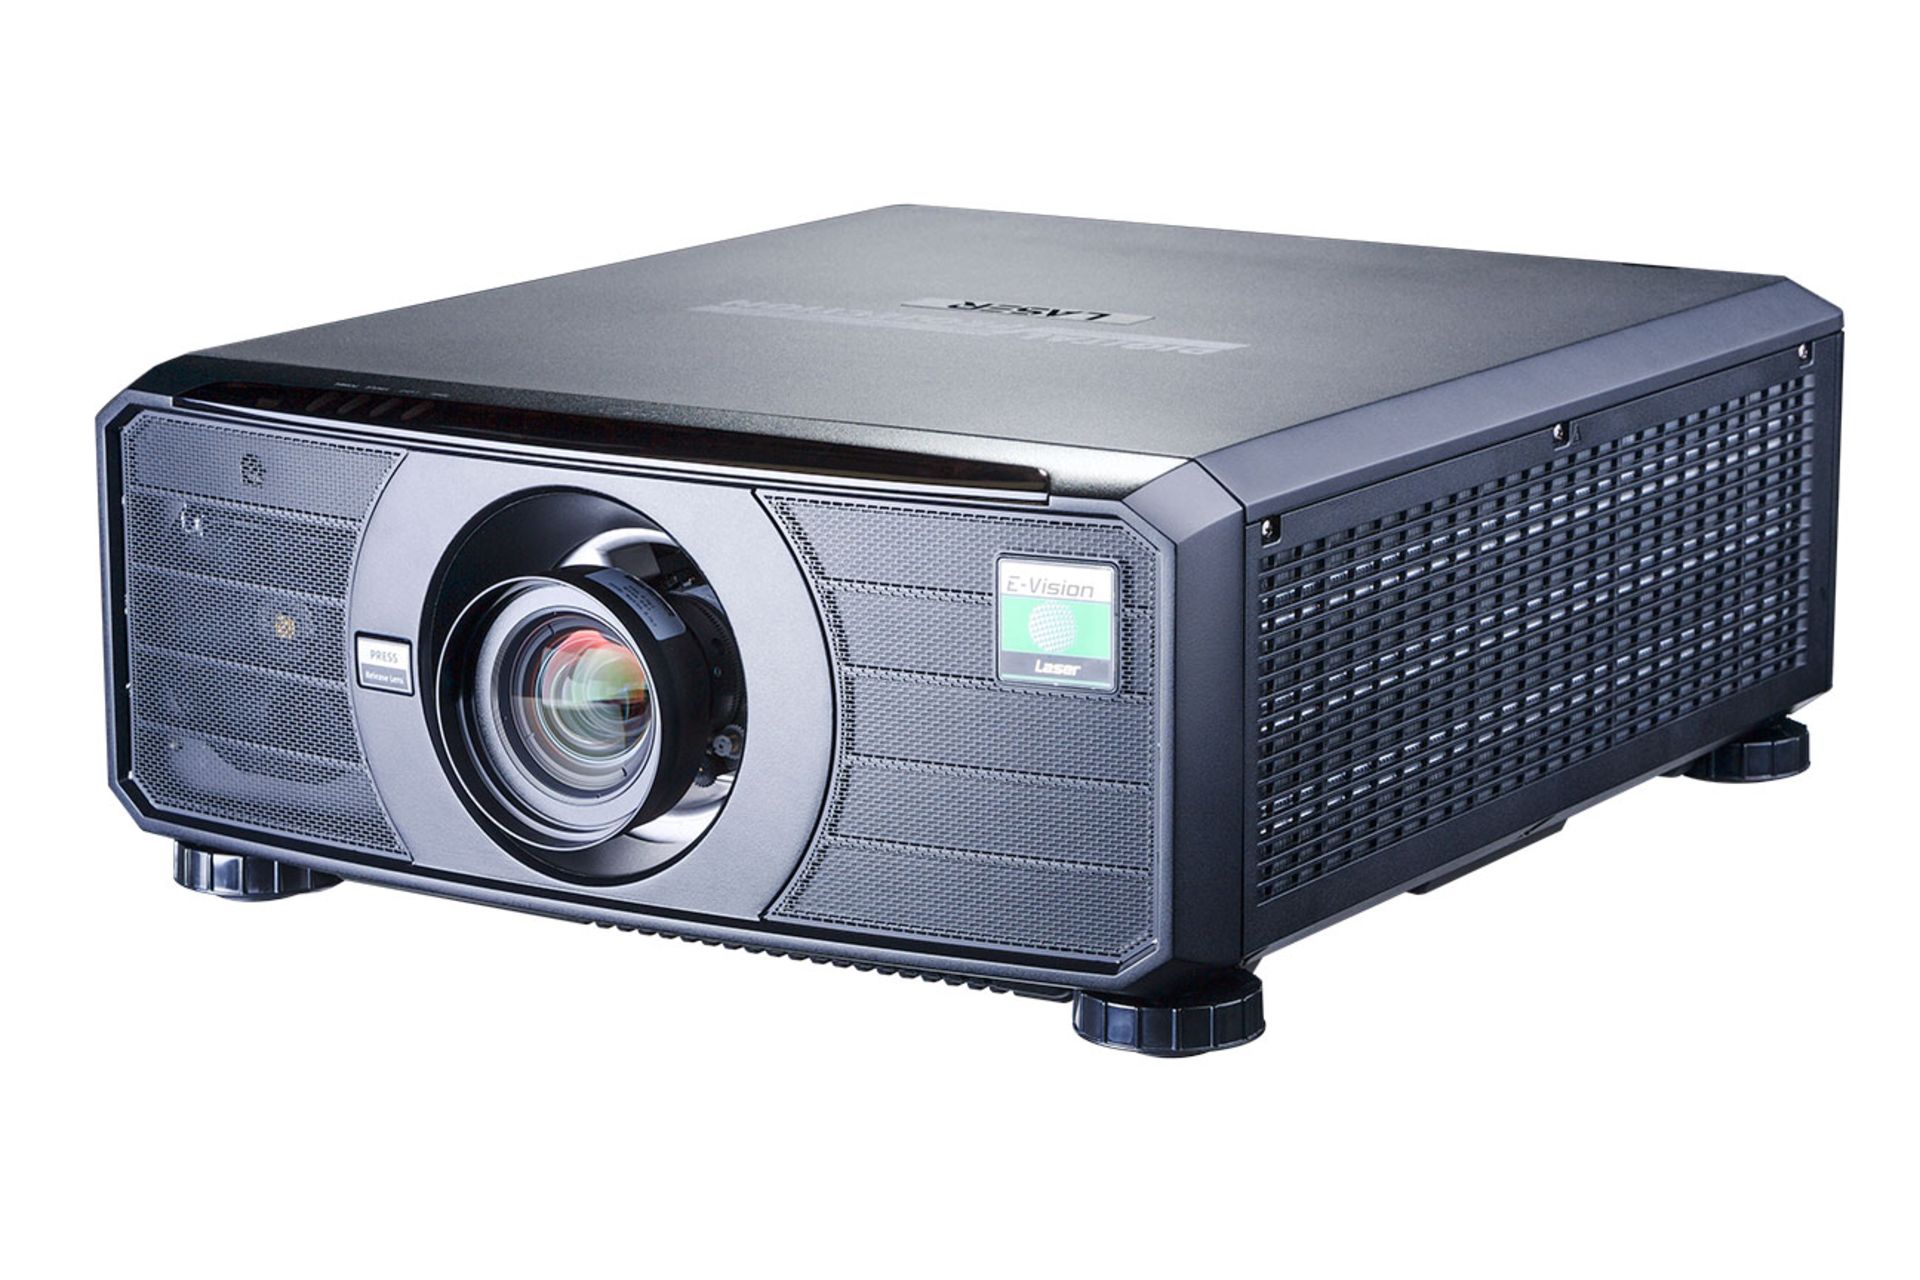 1 BOXED DIGITAL PROJECTION E-VISION LASER 8500 DLP LASER PROJECTOR & 0.38:1 (117-341A) SHORT THROW